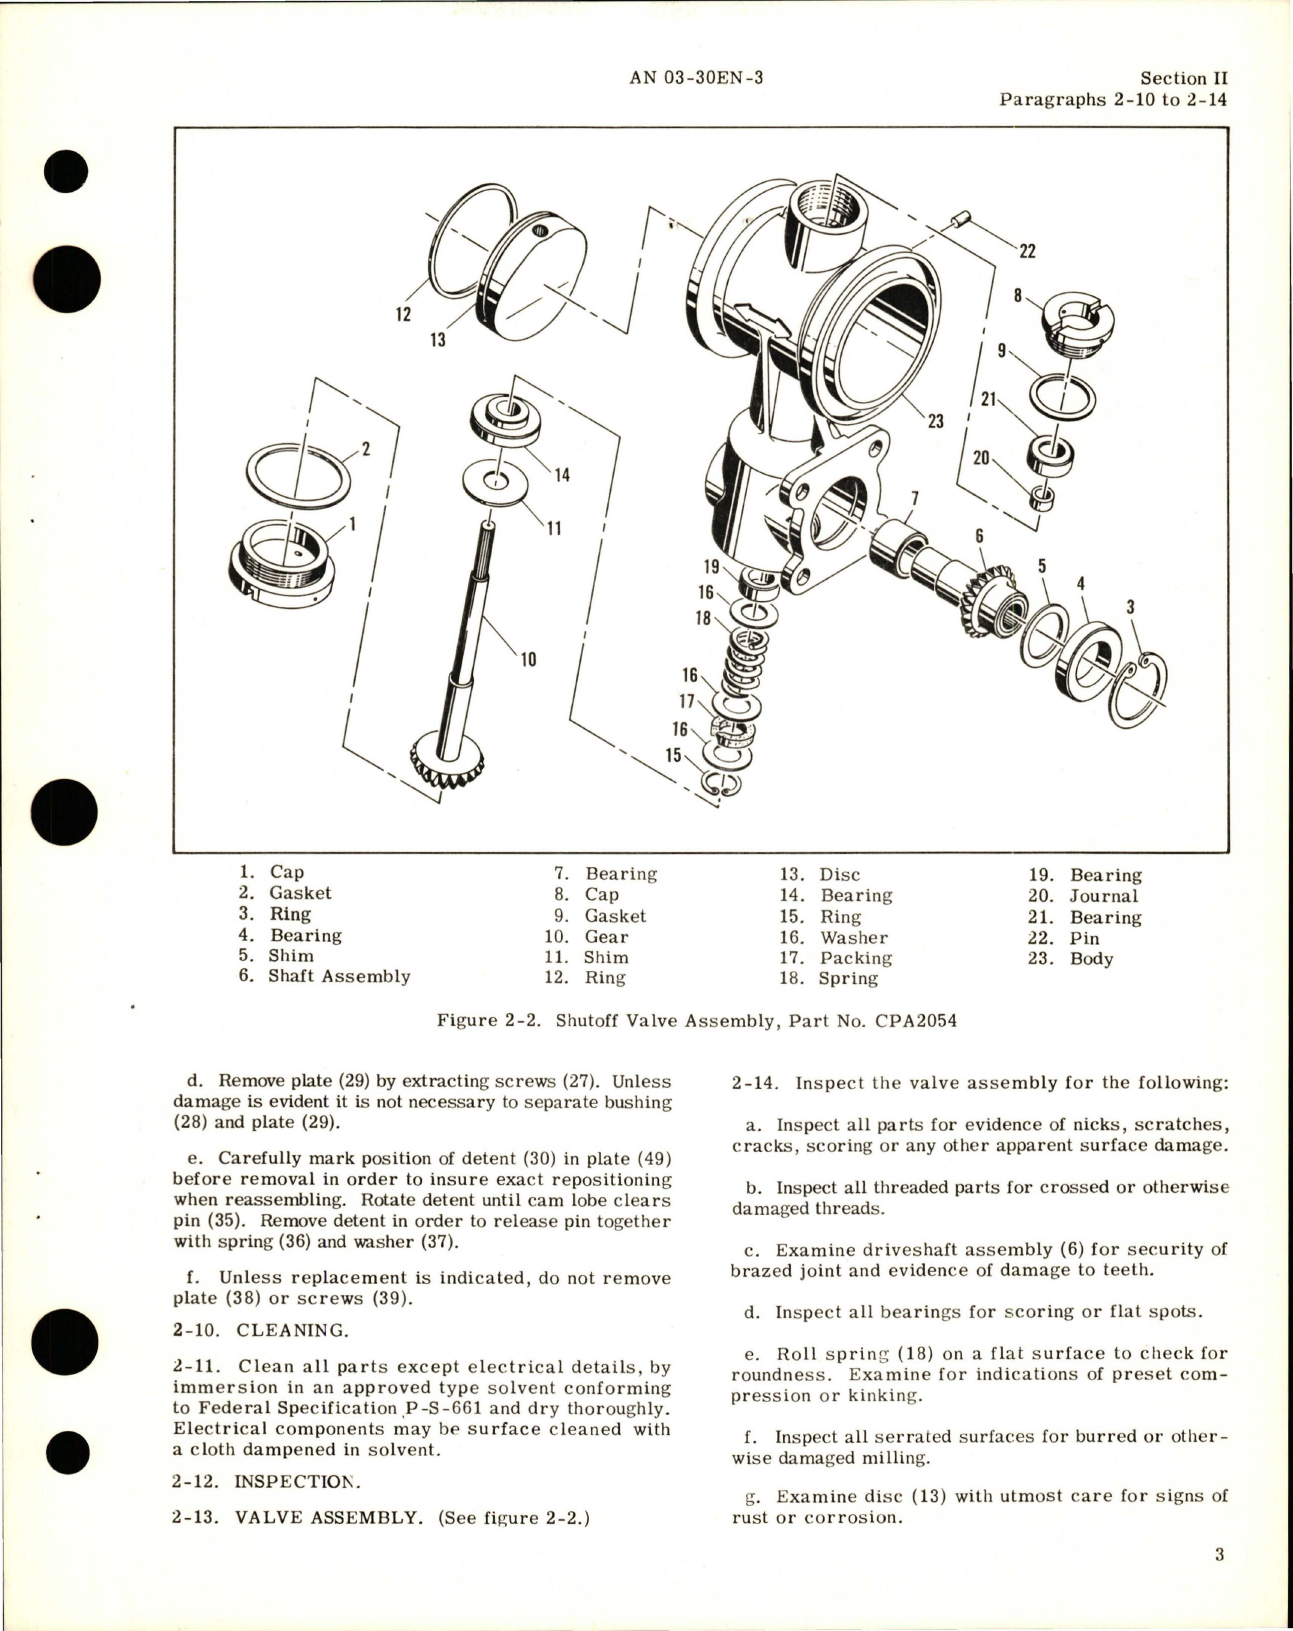 Sample page 7 from AirCorps Library document: Overhaul Instructions for Hot Air Shutoff Valve - Parts PAC 2274, PAC 2275, PAC 2279, PAC 2279-1, and PAC 3022 